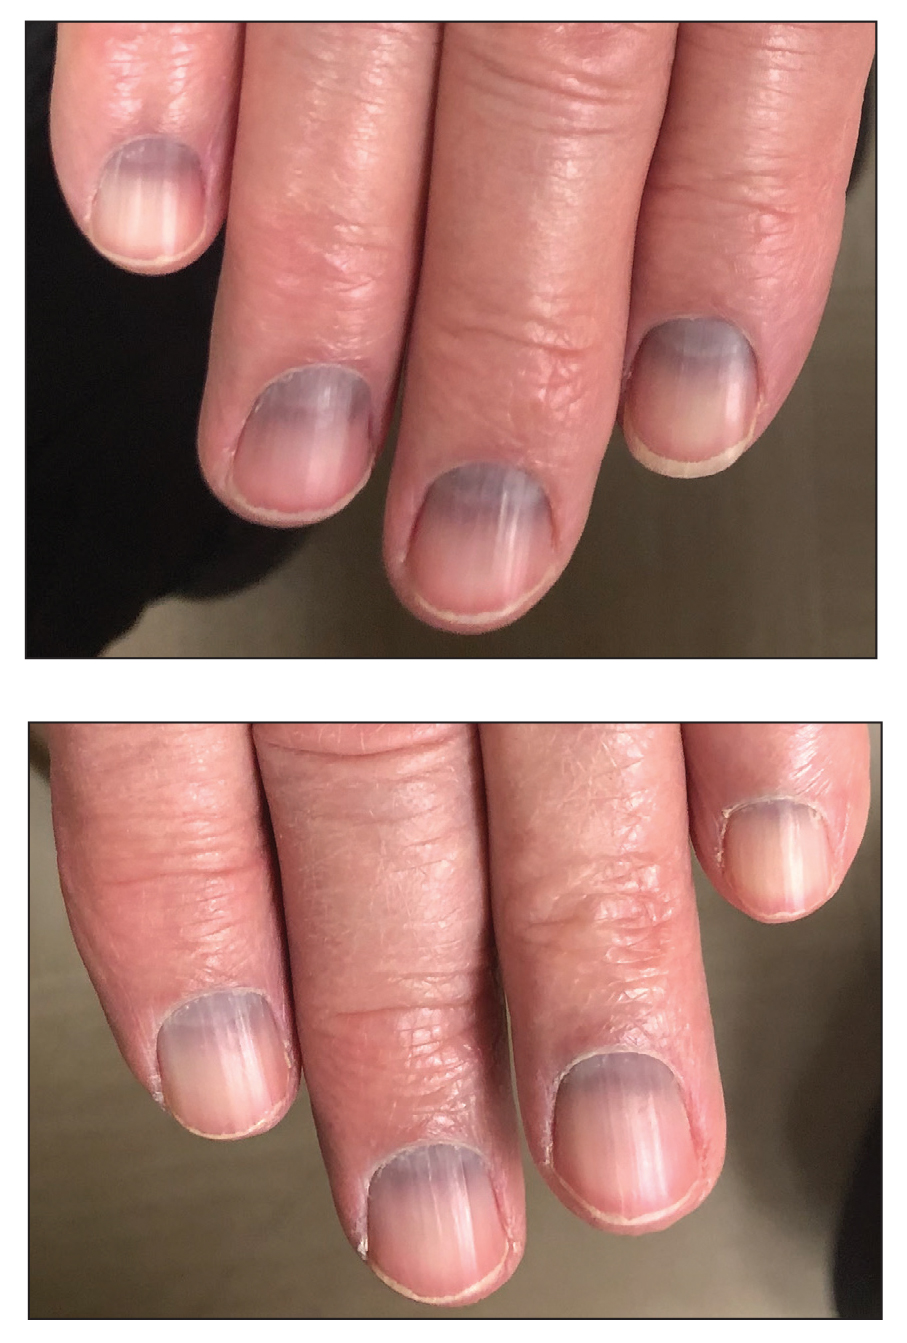 Caratin Rx Blog: Green Nail Syndrome: What Is It And How To Cure It